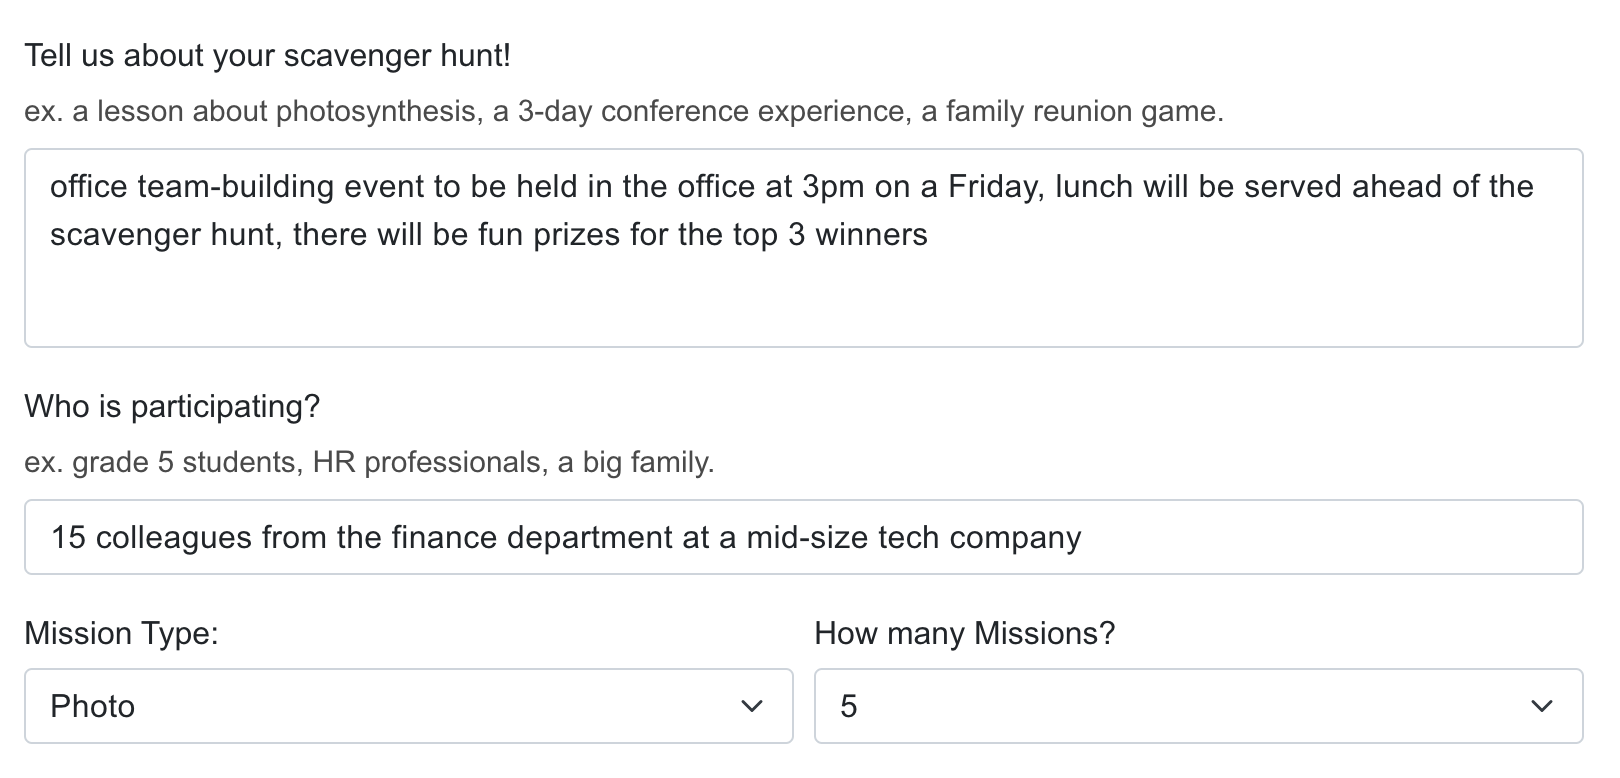 Tell us about your scavenger hunt: office team-building event to be held in the office at 3pm on a Friday, lunch will be served ahead of the scavenger hunt, there will be fun prizes for the top 3 winners. Who is participating? 15 colleagues form the finance department at a mid-size tech company